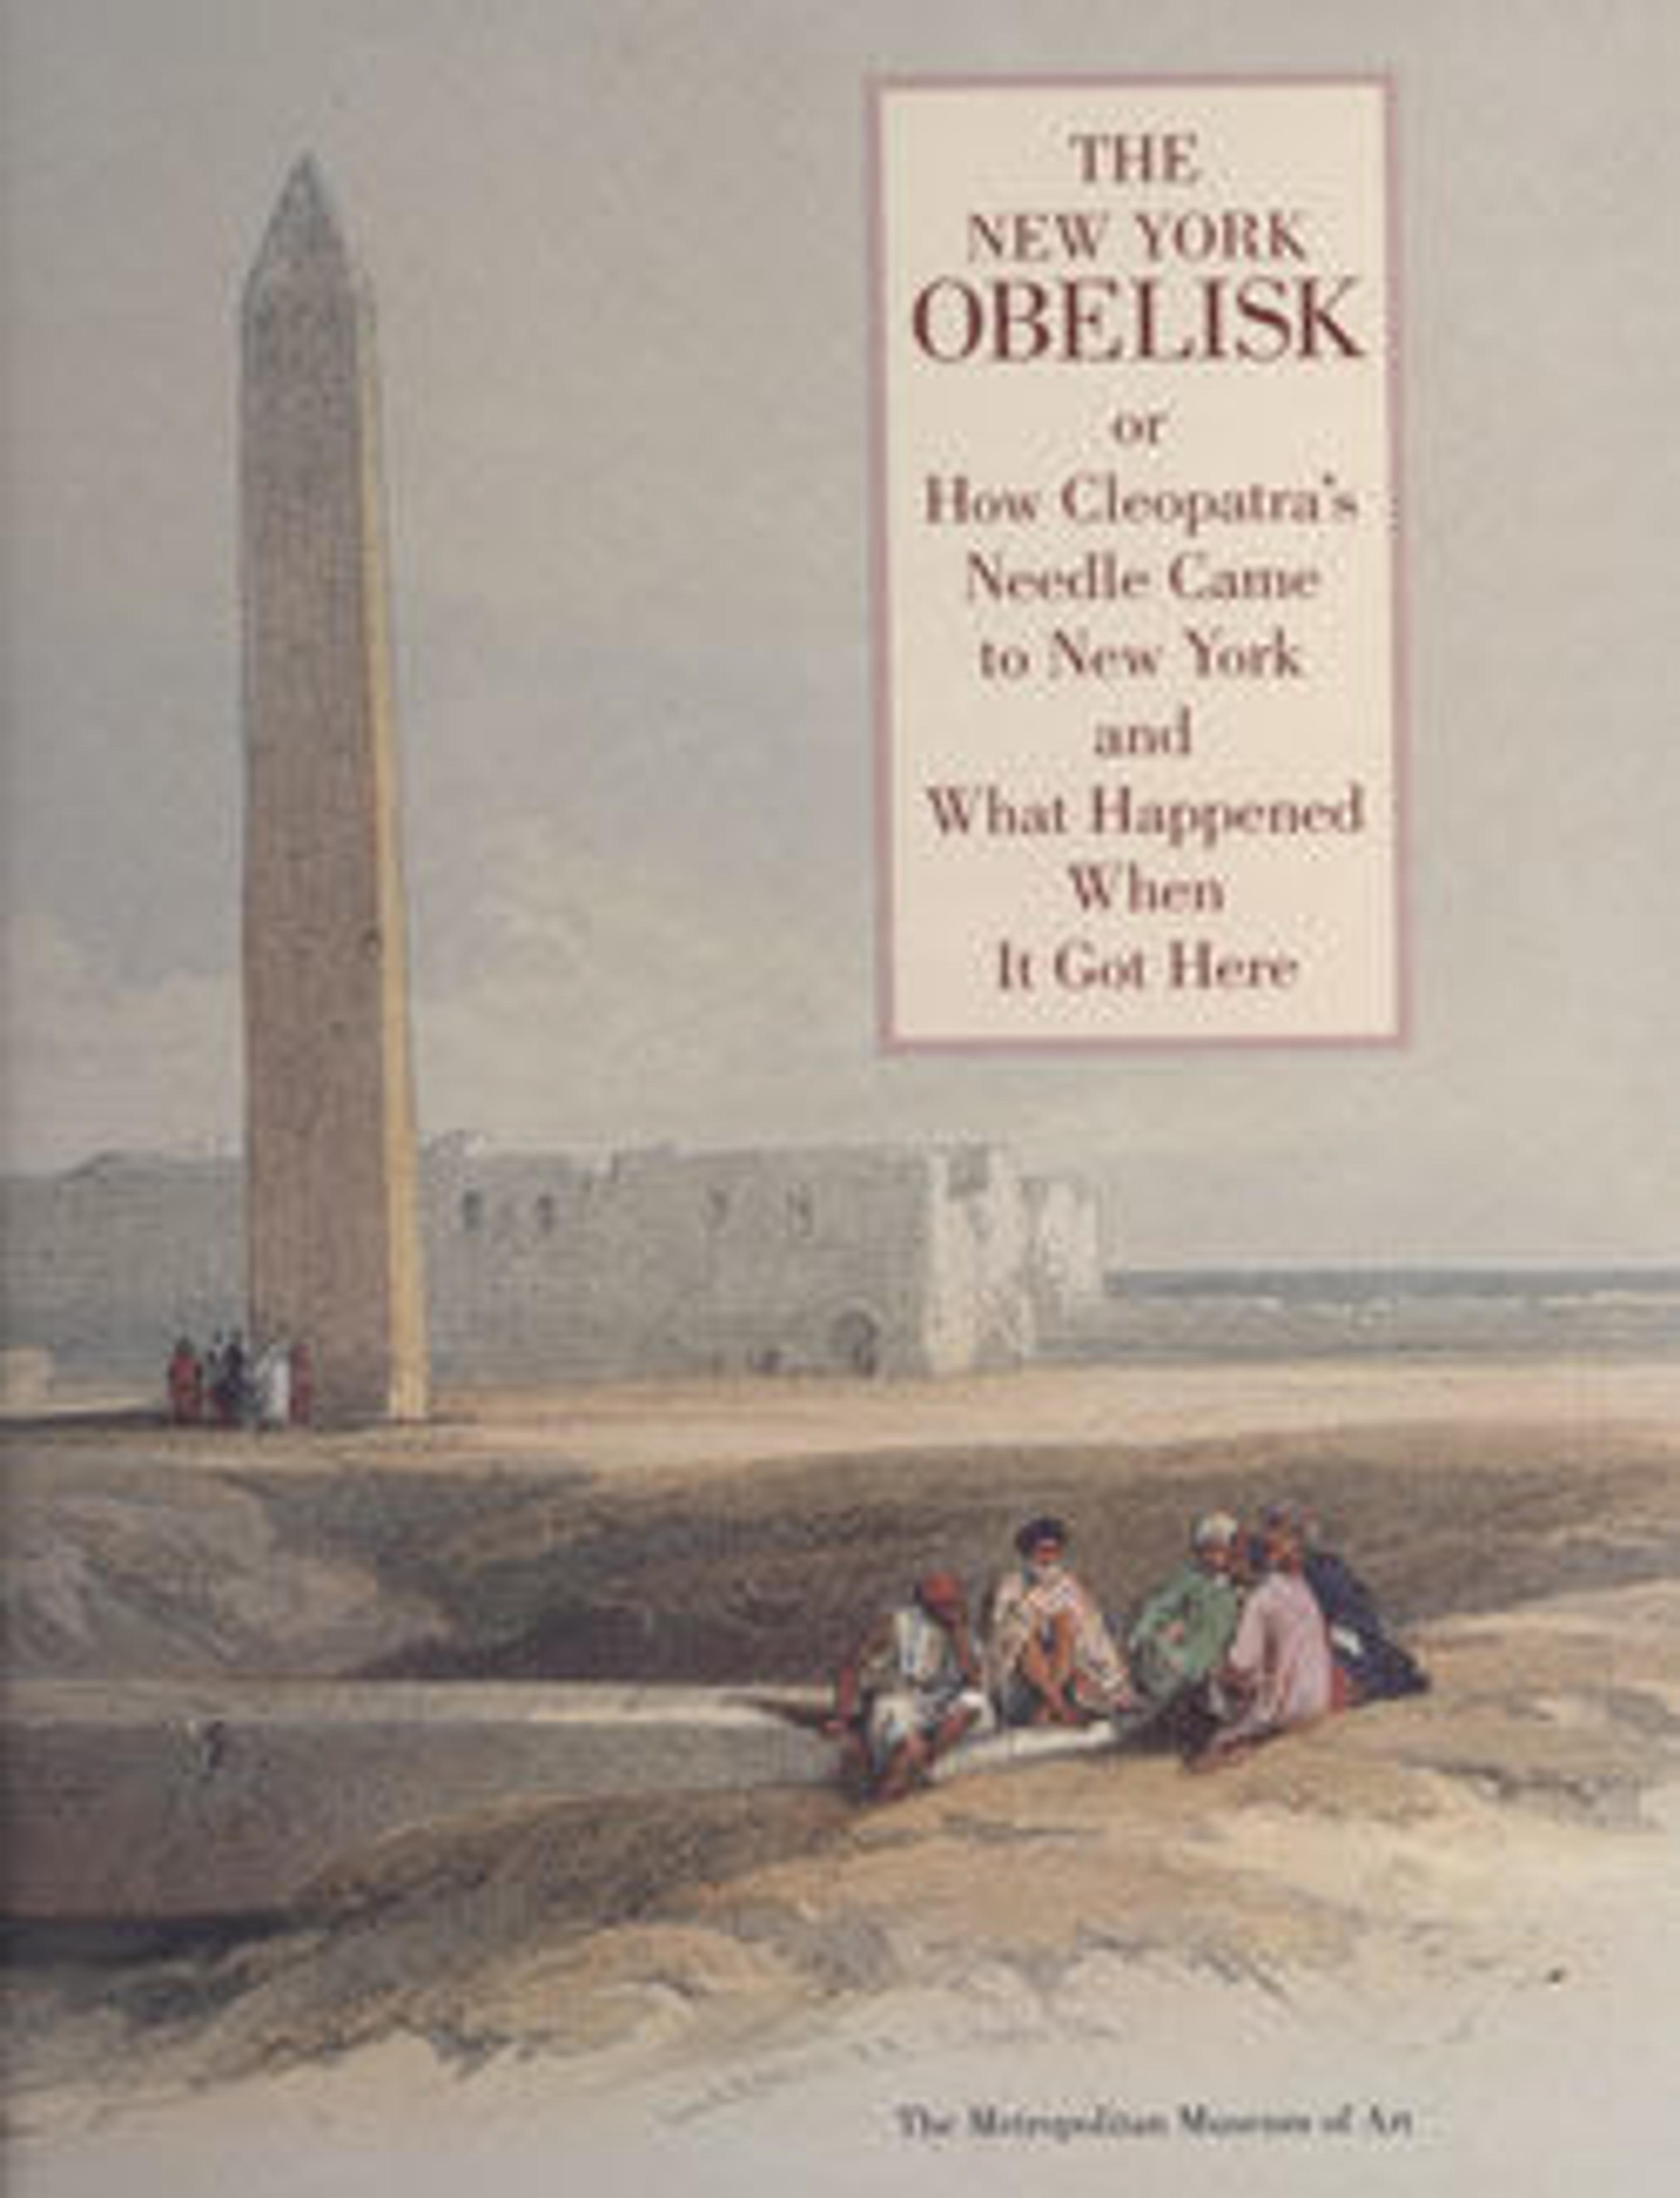 The New York Obelisk, or, How Cleopatra's Needle Came to New York and What Happened When It Got Here